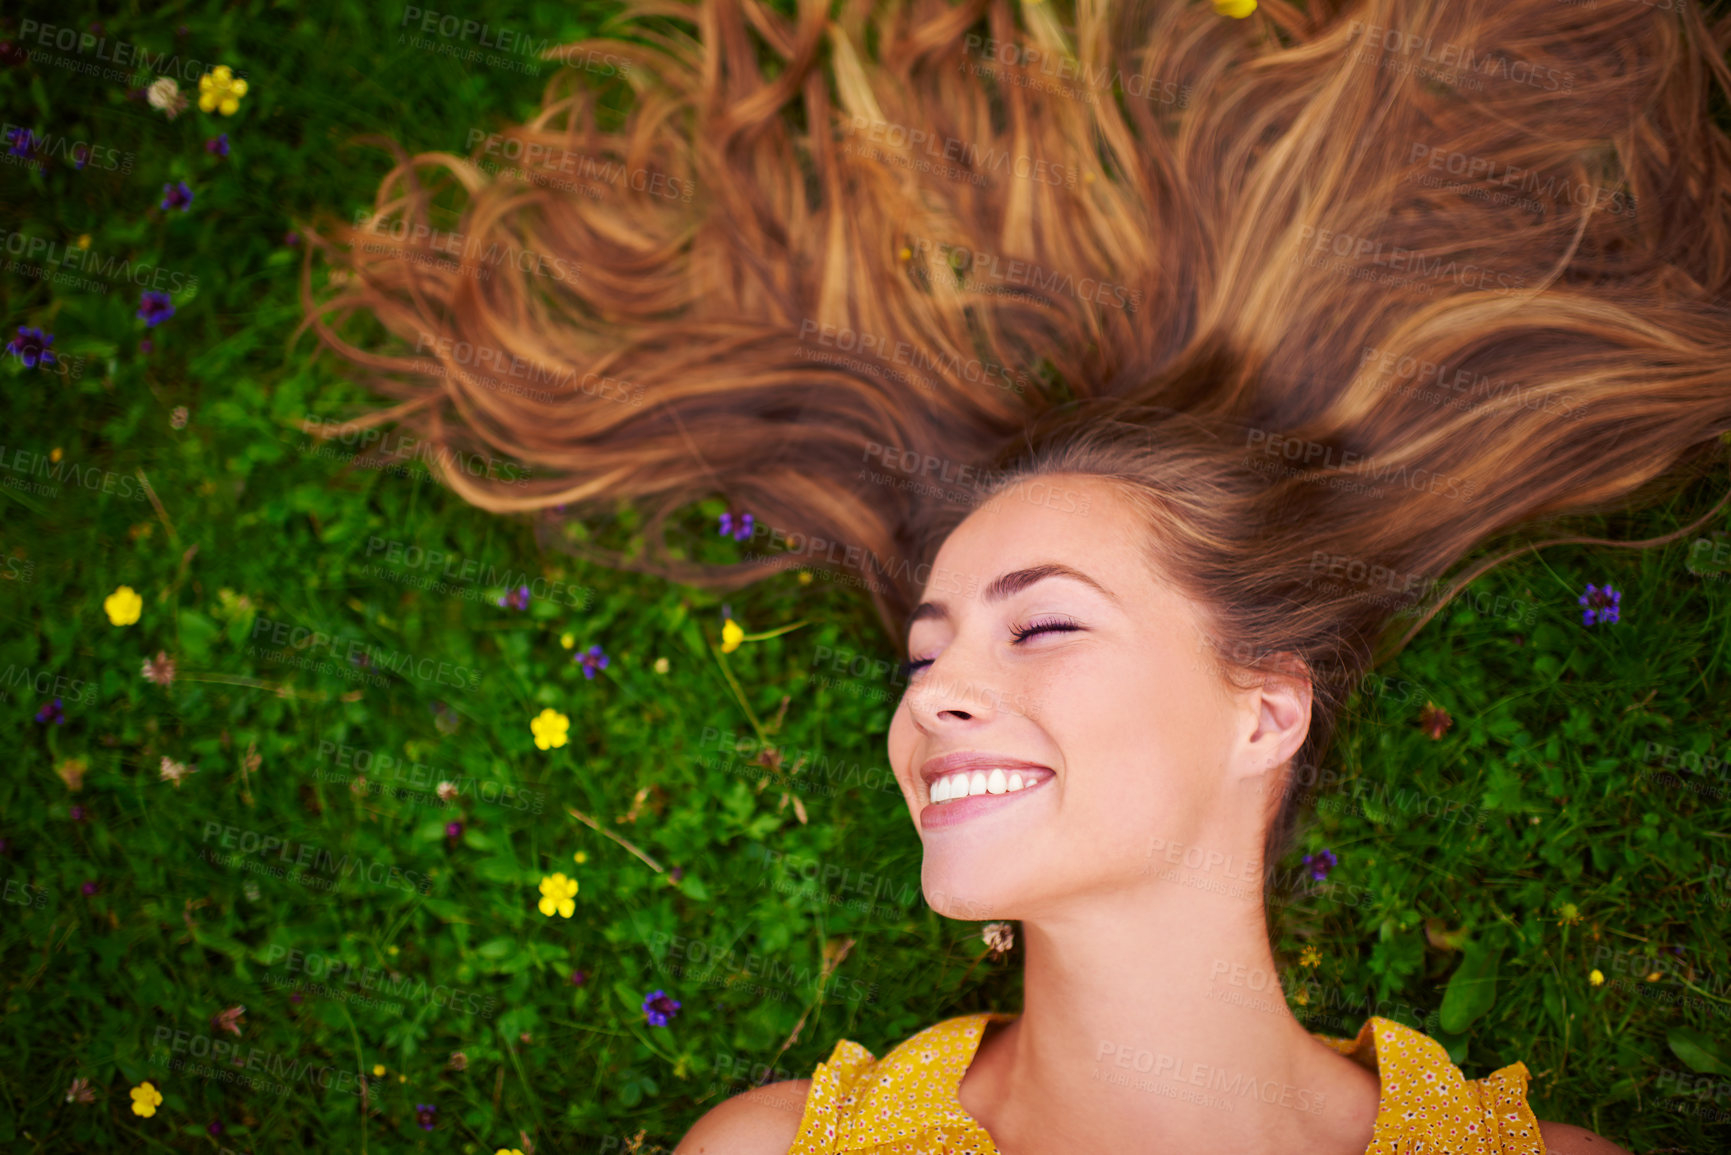 Buy stock photo High angle shot of a carefree young woman relaxing in a field of grass and flowers